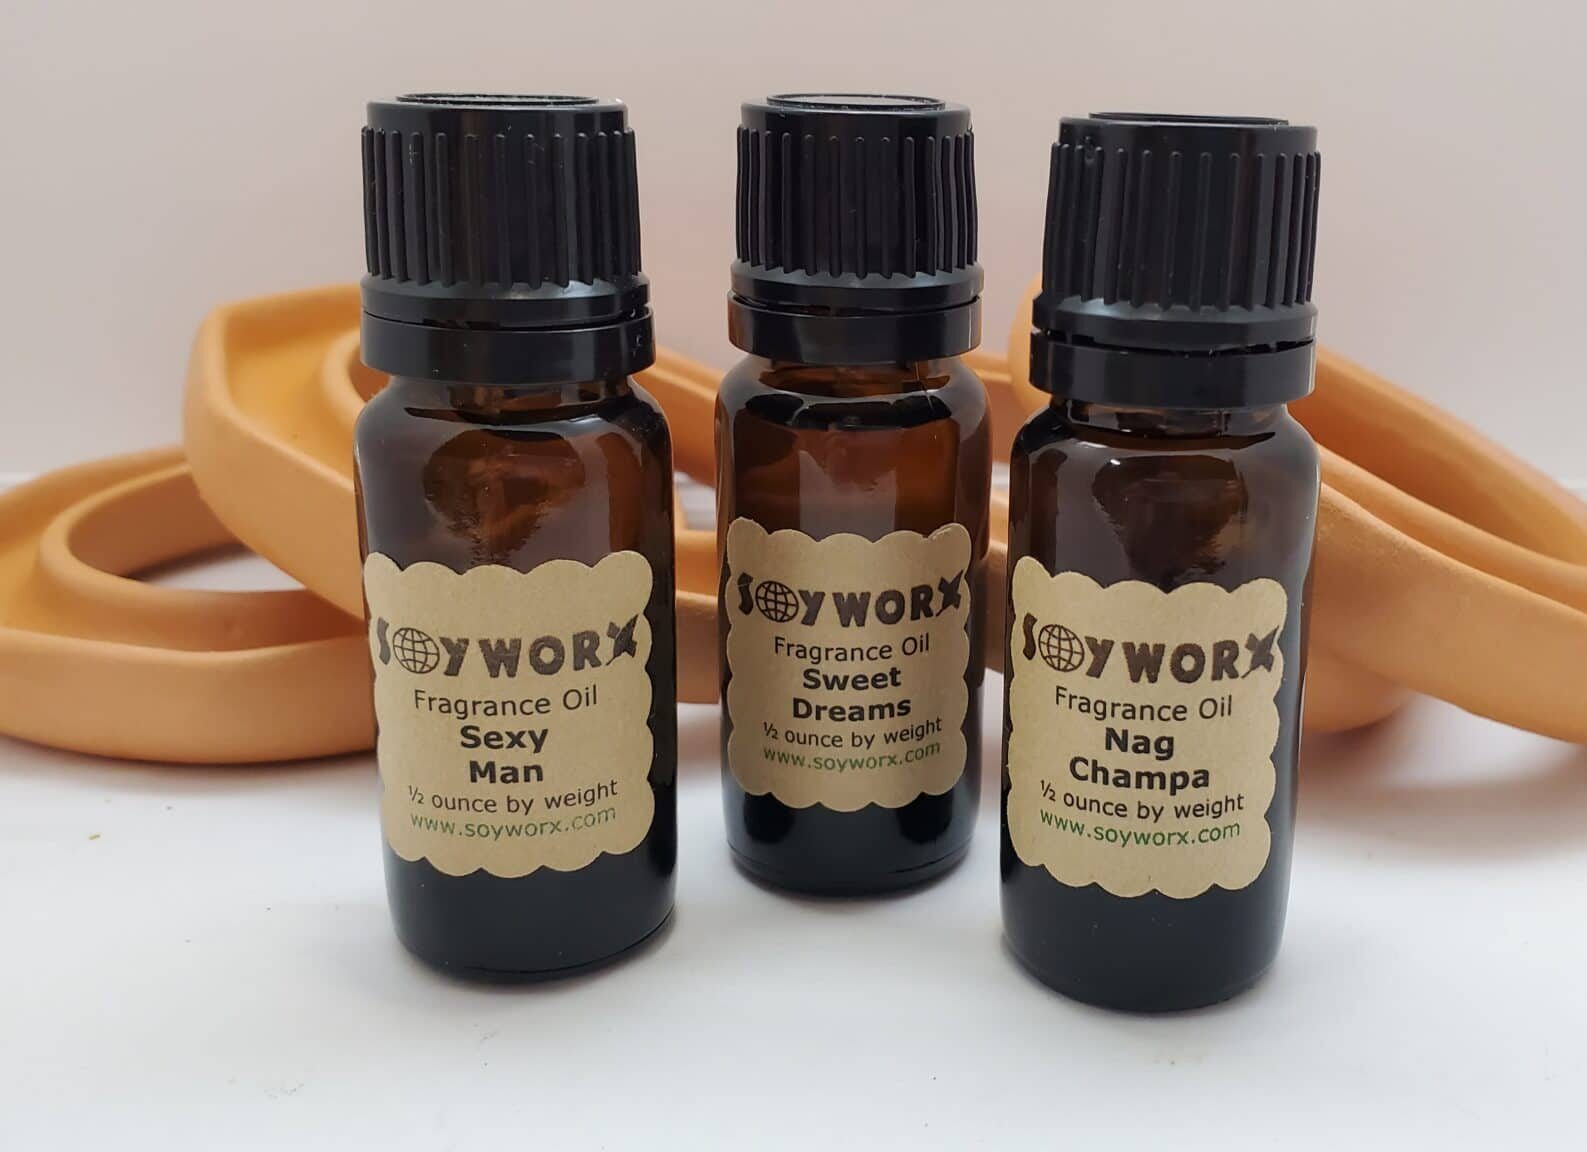 Soyworx Fragrance Oils come with built in Euro Dropper!